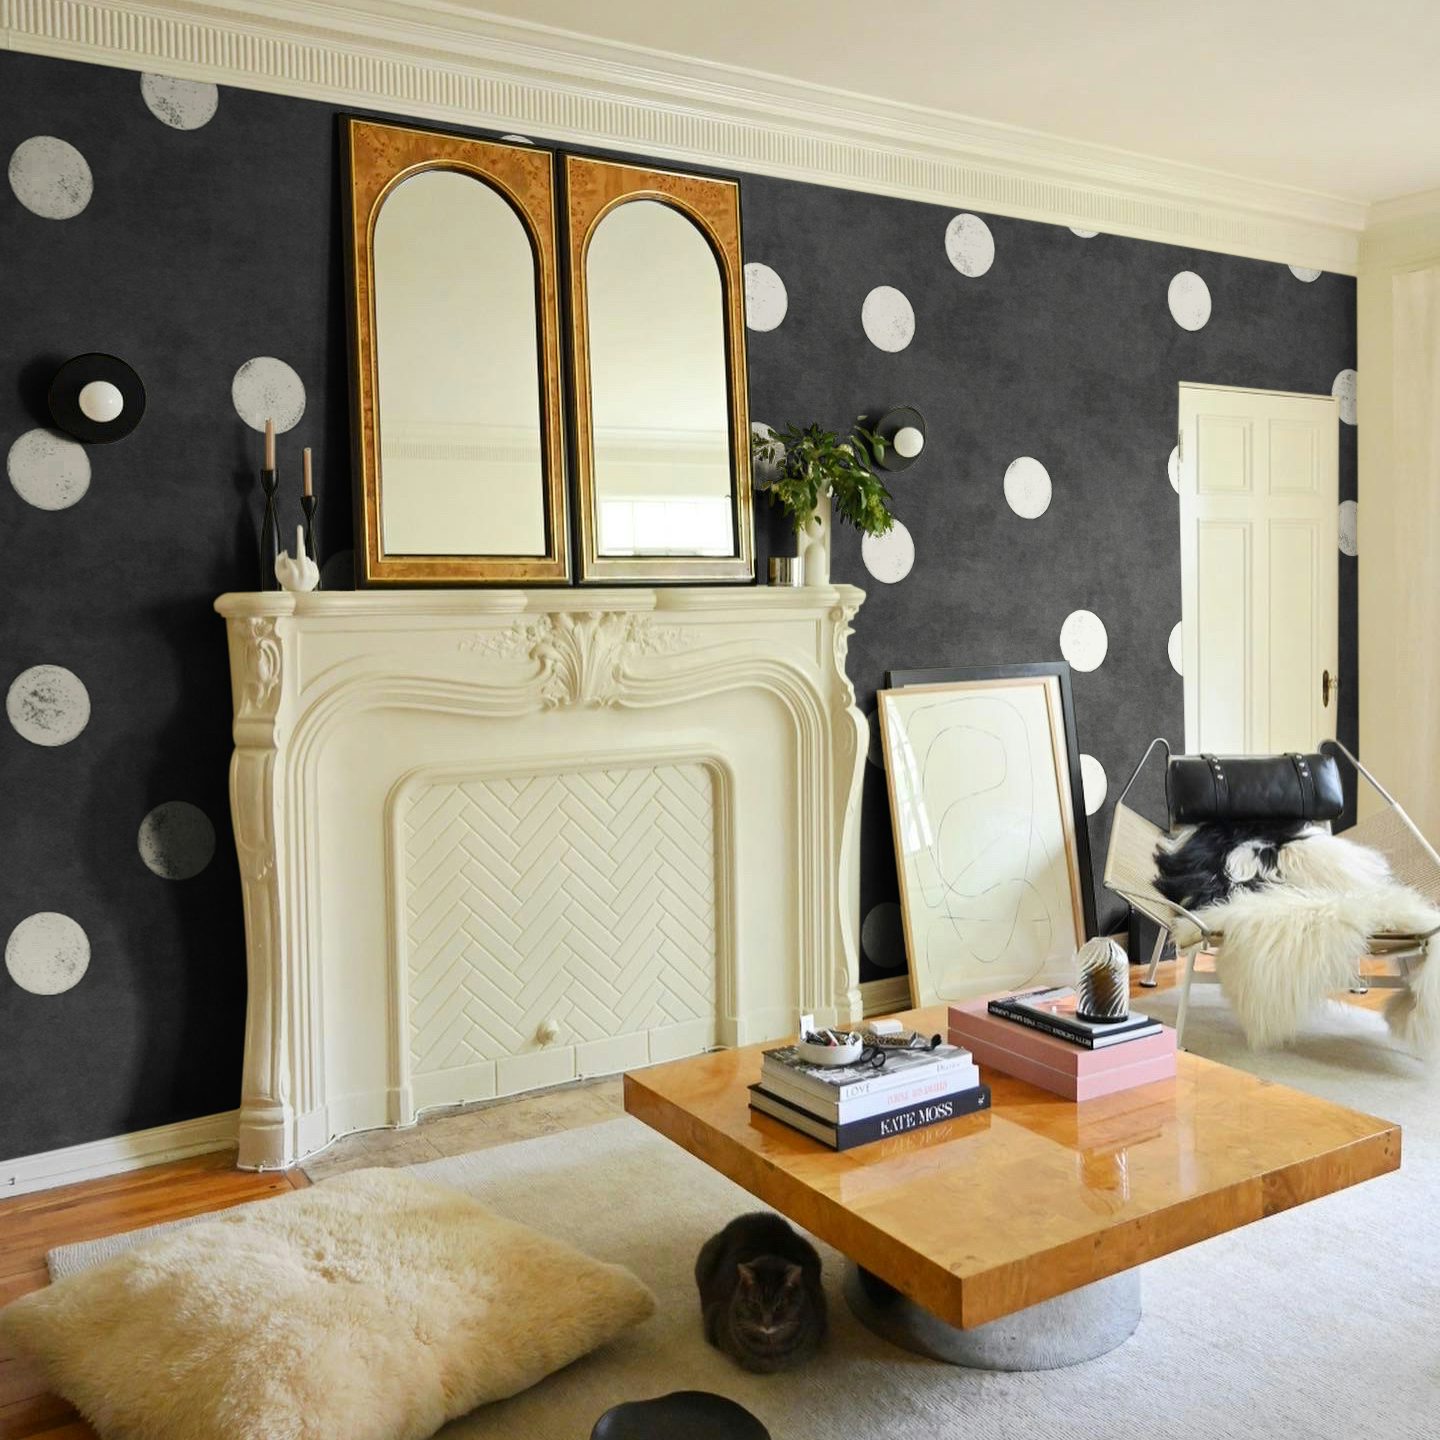 A light-filled living room showcases an accent wall with carbon wallpaper and white dots